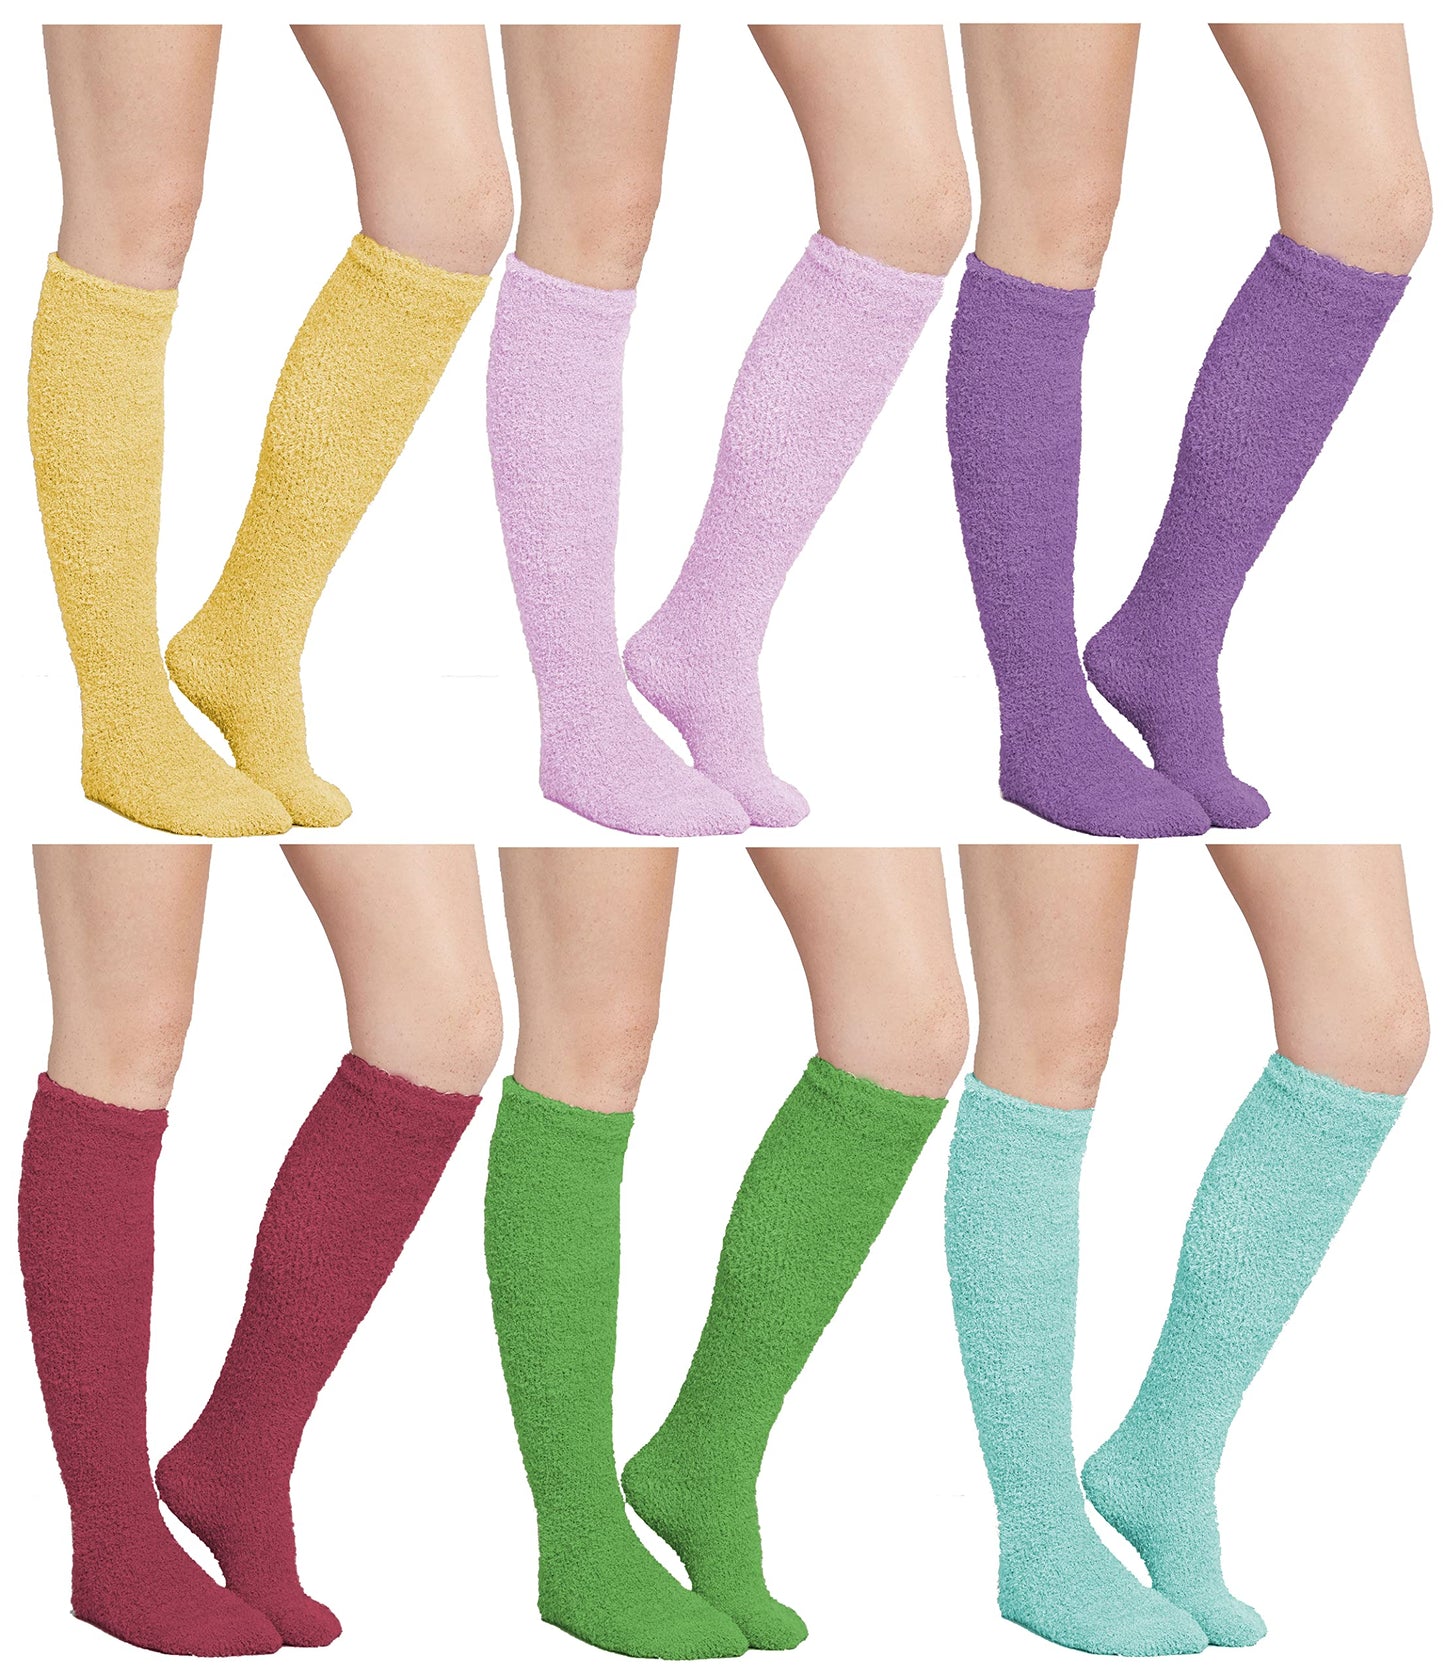 Womens Thick Comfortable Soft Fuzzy Socks Solid Cozy Calf High Winter Plush Socks 6 Pairs Size 9-11